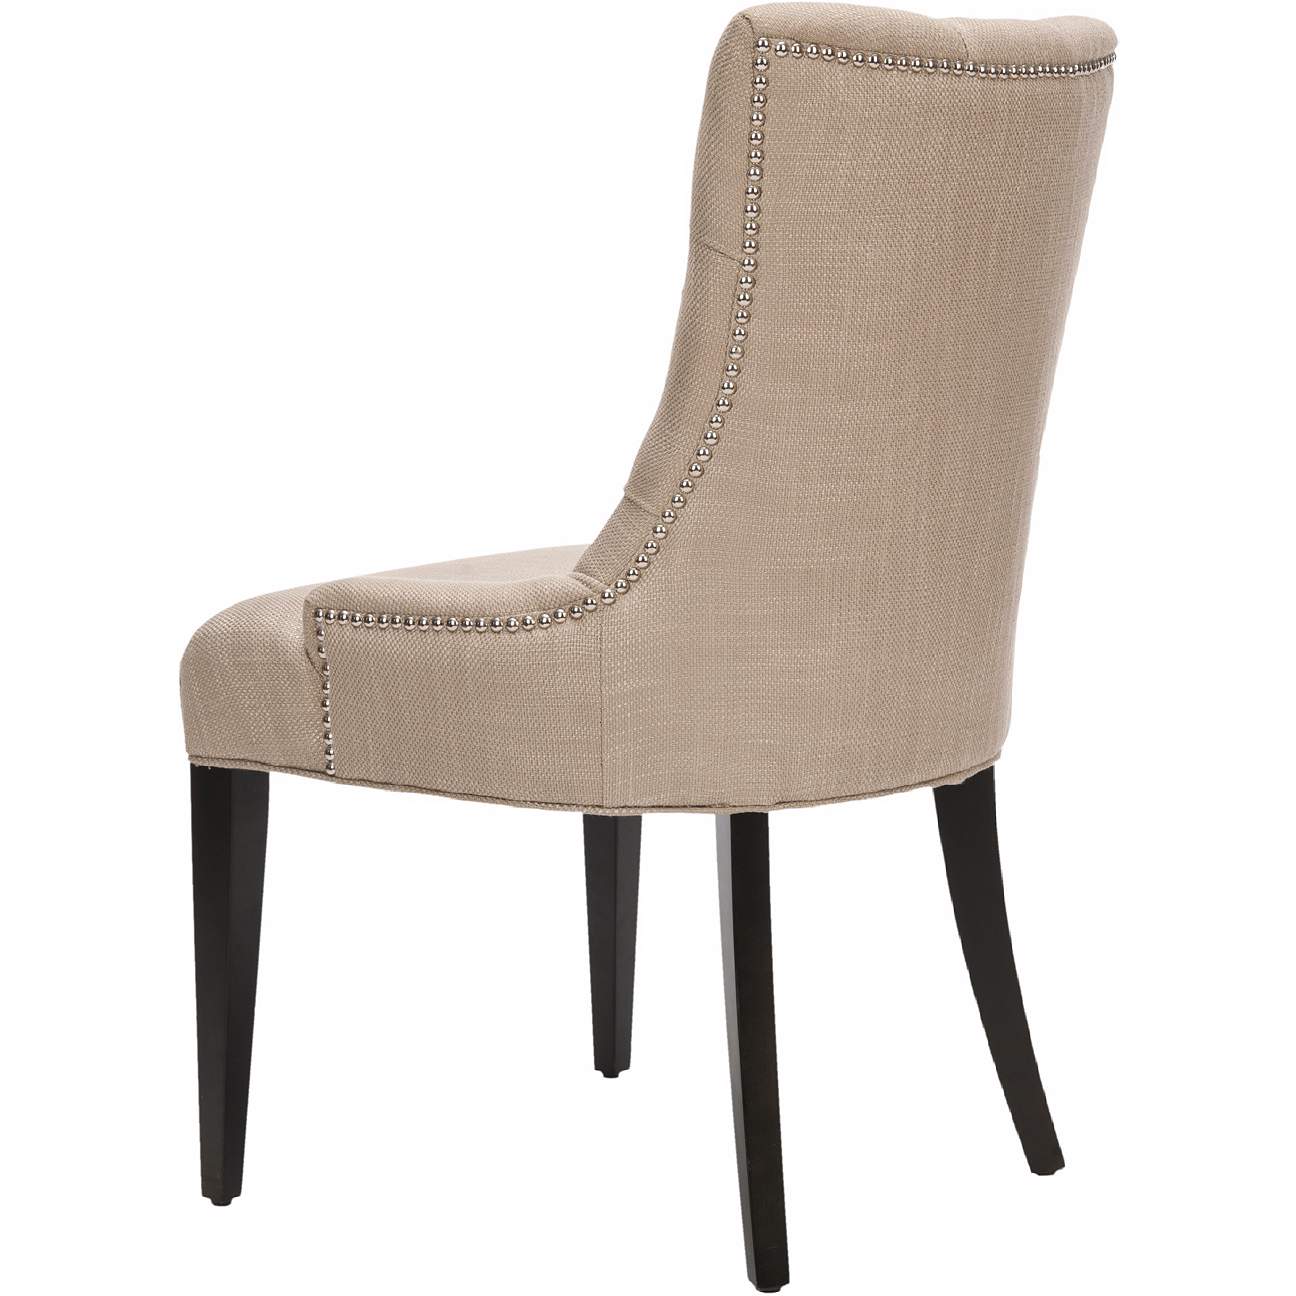 Maria Gold Linen Upholstered Chair - #4M415 | Lamps Plus